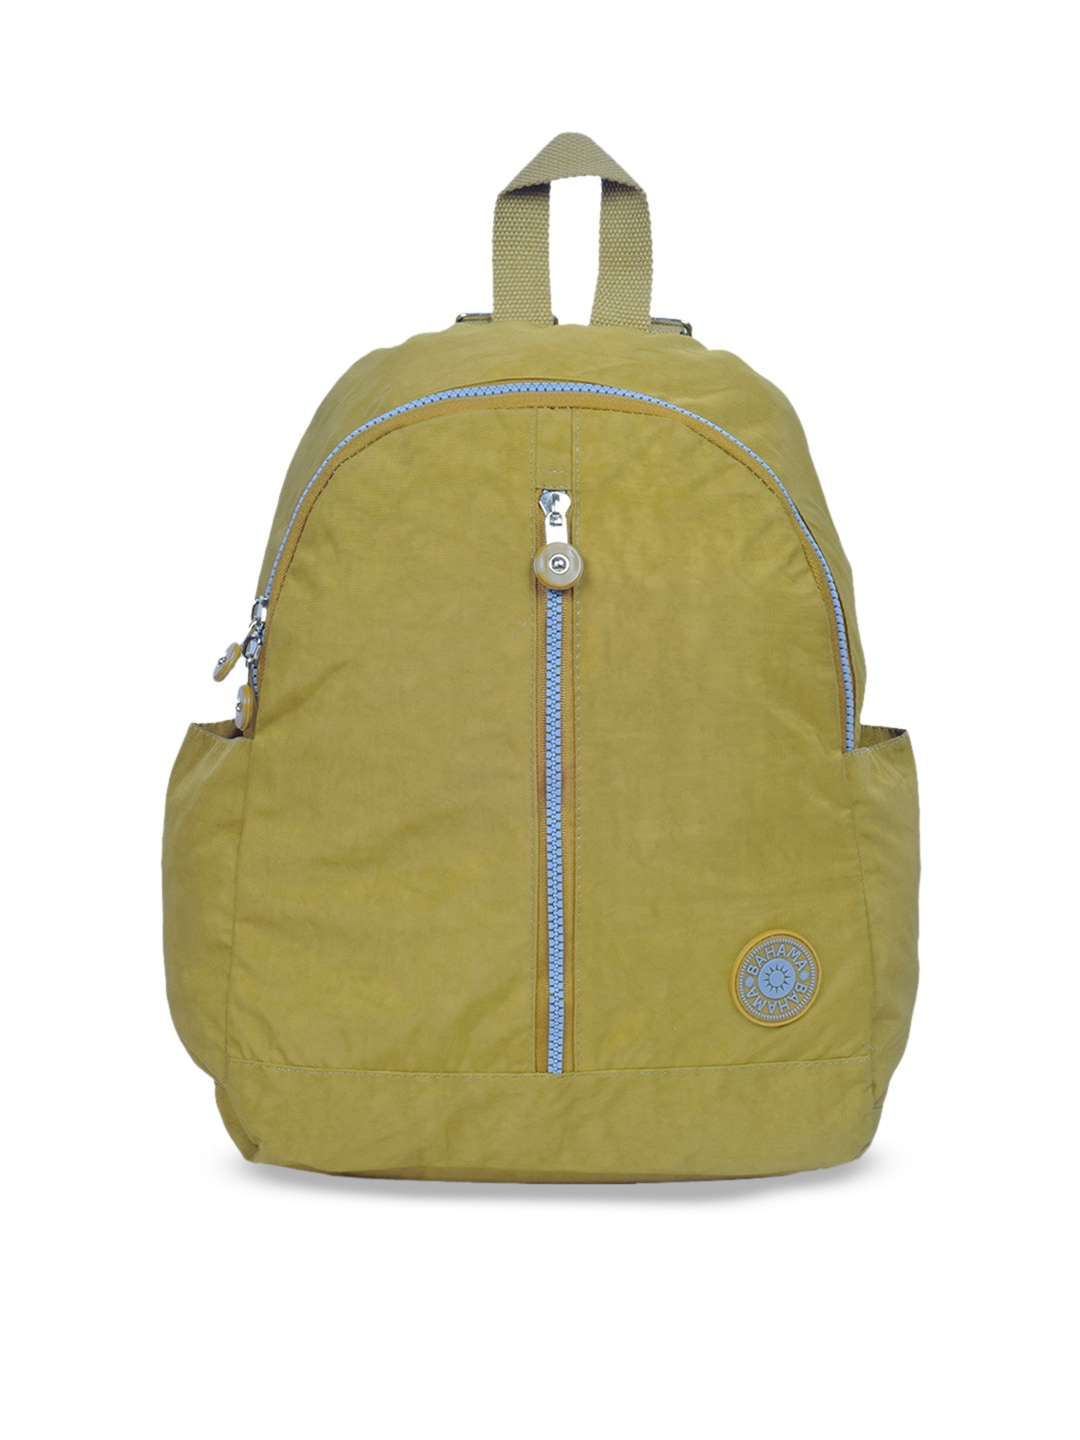 BAHAMA Crinkle Unisex Green Solid Backpack Price in India